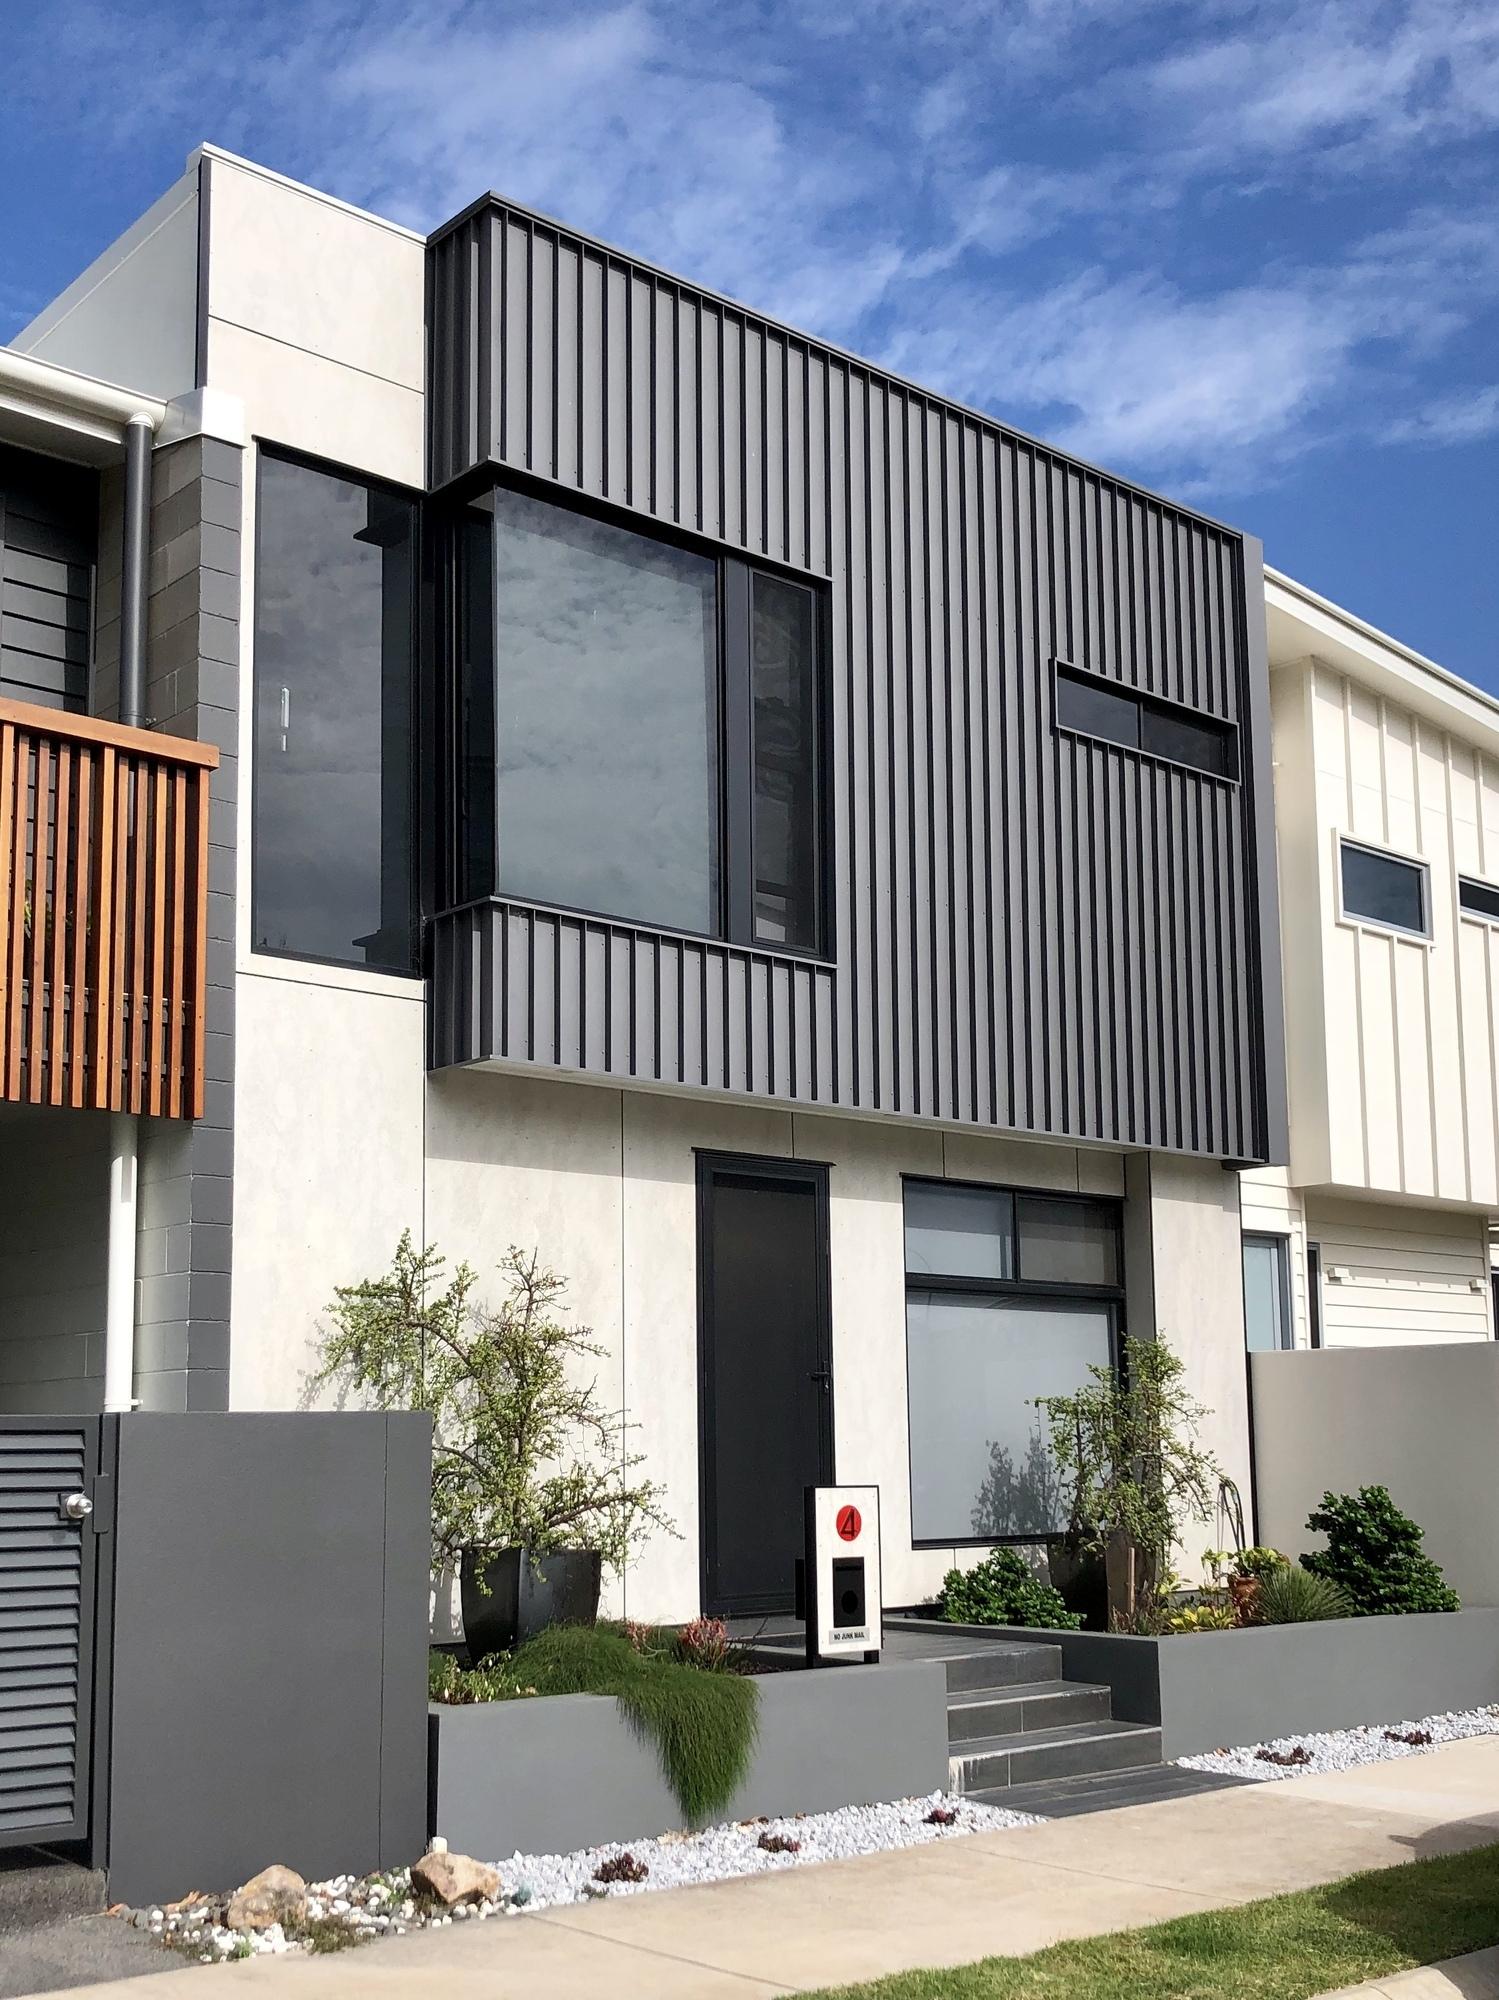 Henriette from Maroochydore, QLD loves COLORBOND® steel. Roofing, Guttering & Fascia, Walling made from COLORBOND® steel in colour Monument® Matt Finish